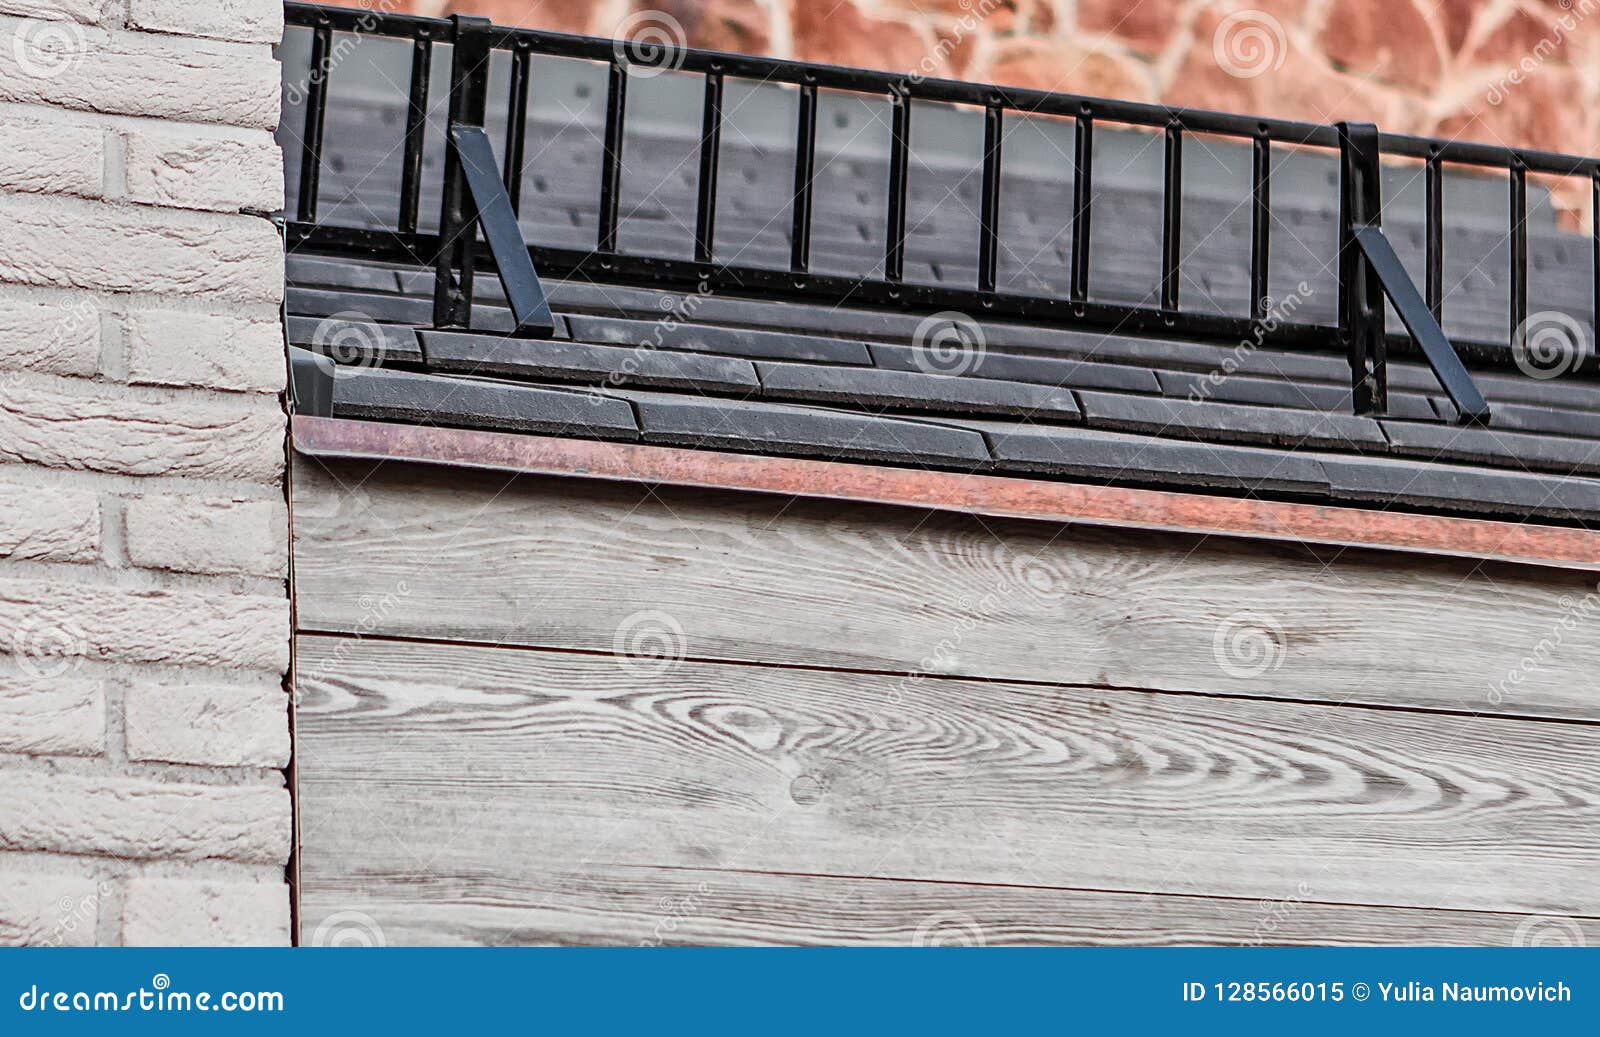 Roof Railing With Gray Wooden Beams, Black Tiles, White ...